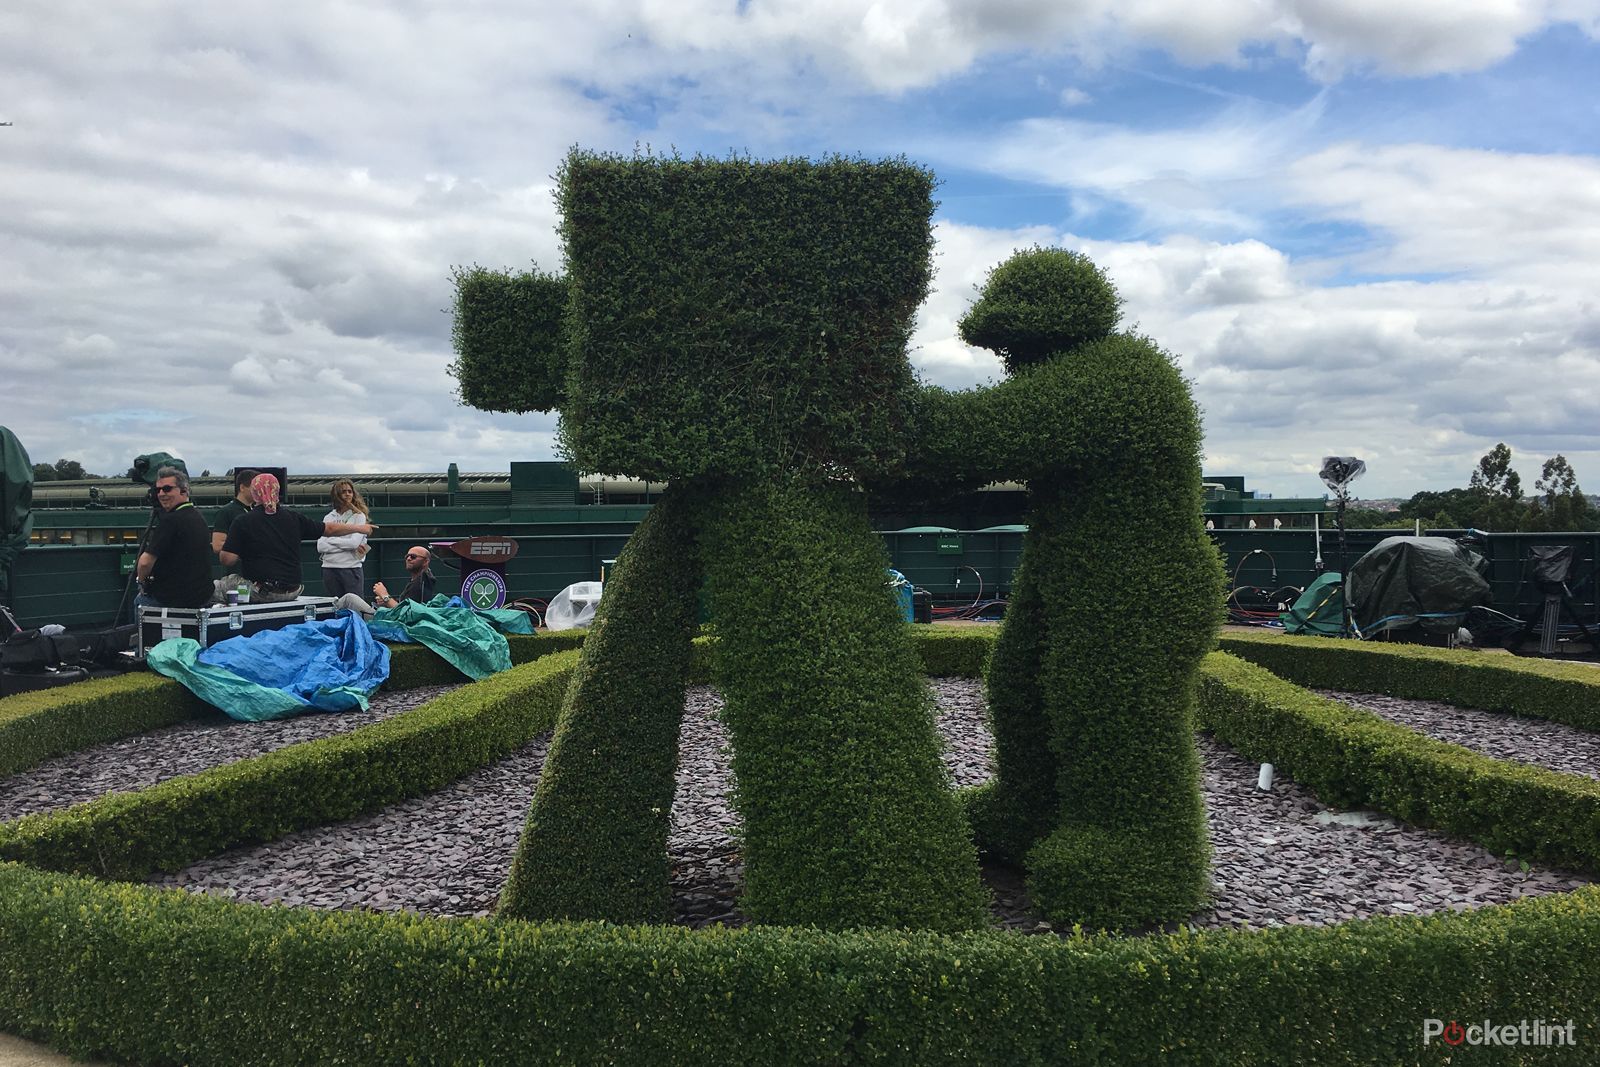 wimbledon 2016 behind the scenes with espn 84 cameras and 120 members of staff image 1